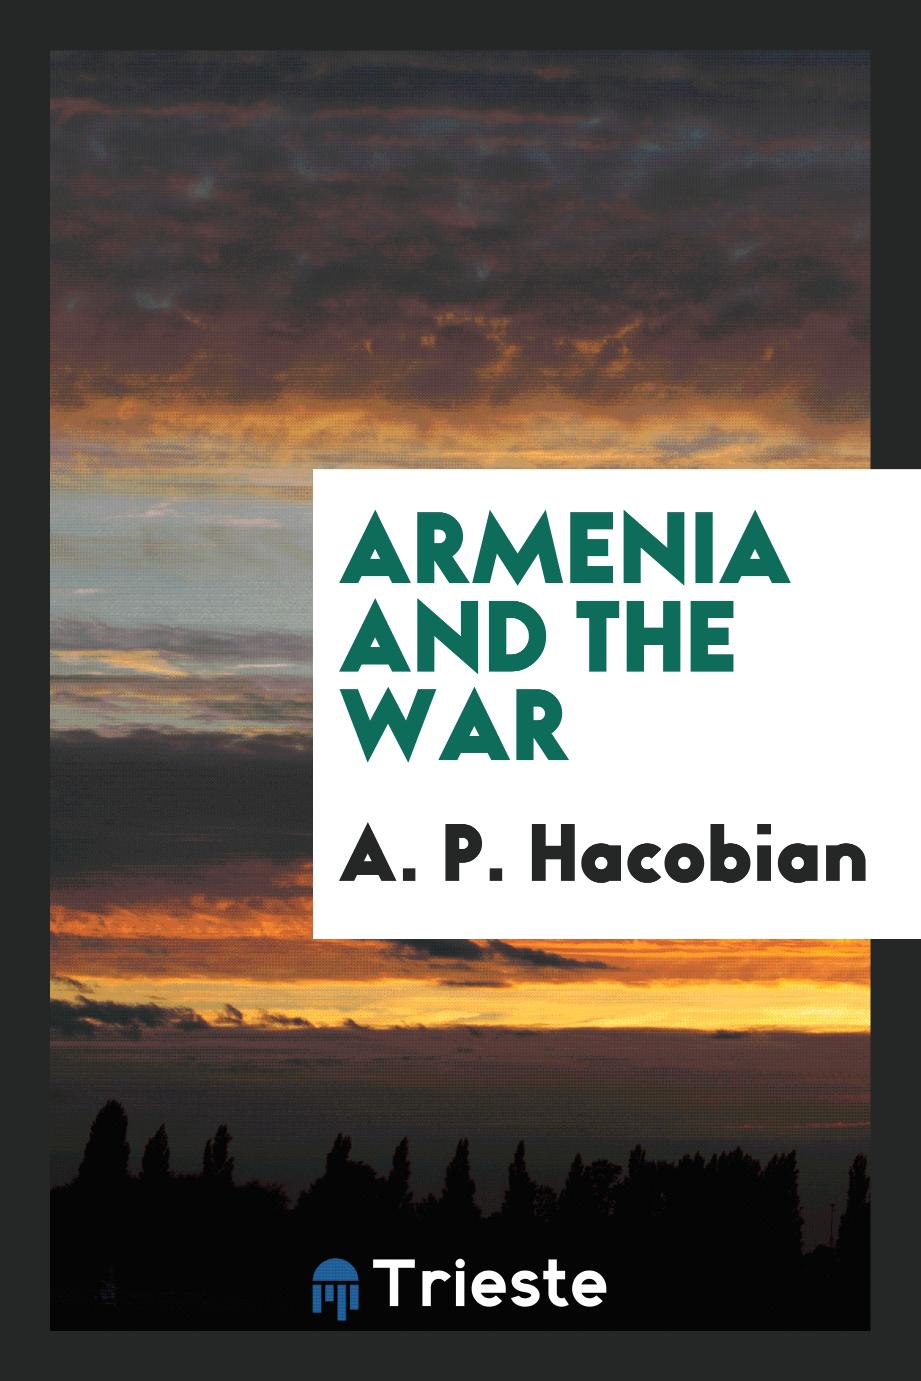 Armenia and the war